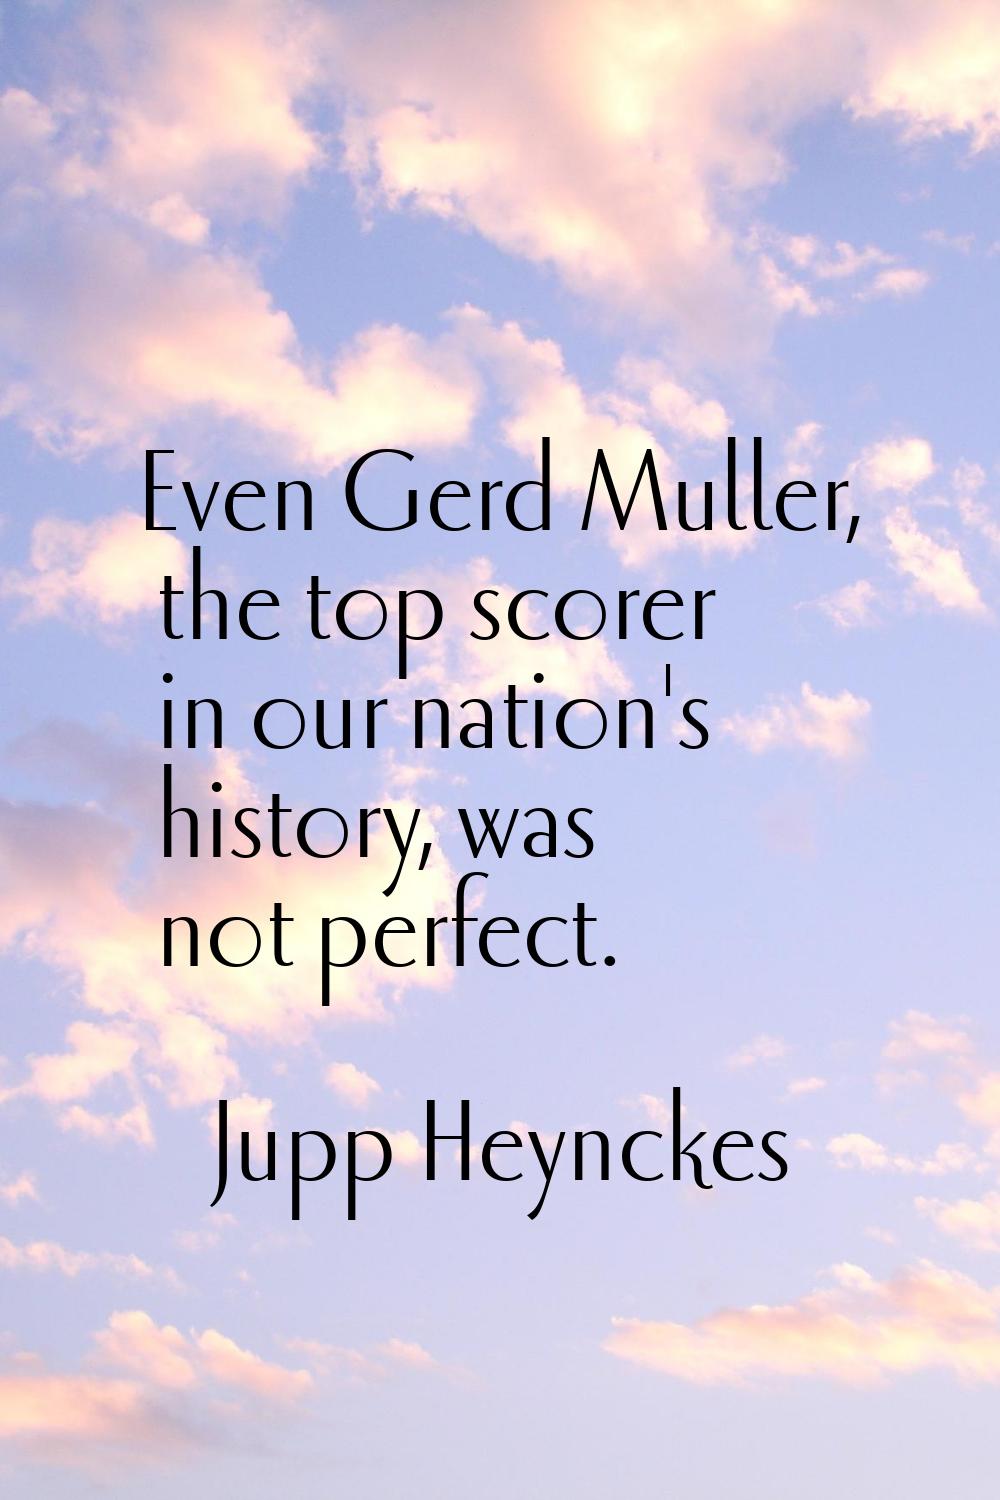 Even Gerd Muller, the top scorer in our nation's history, was not perfect.